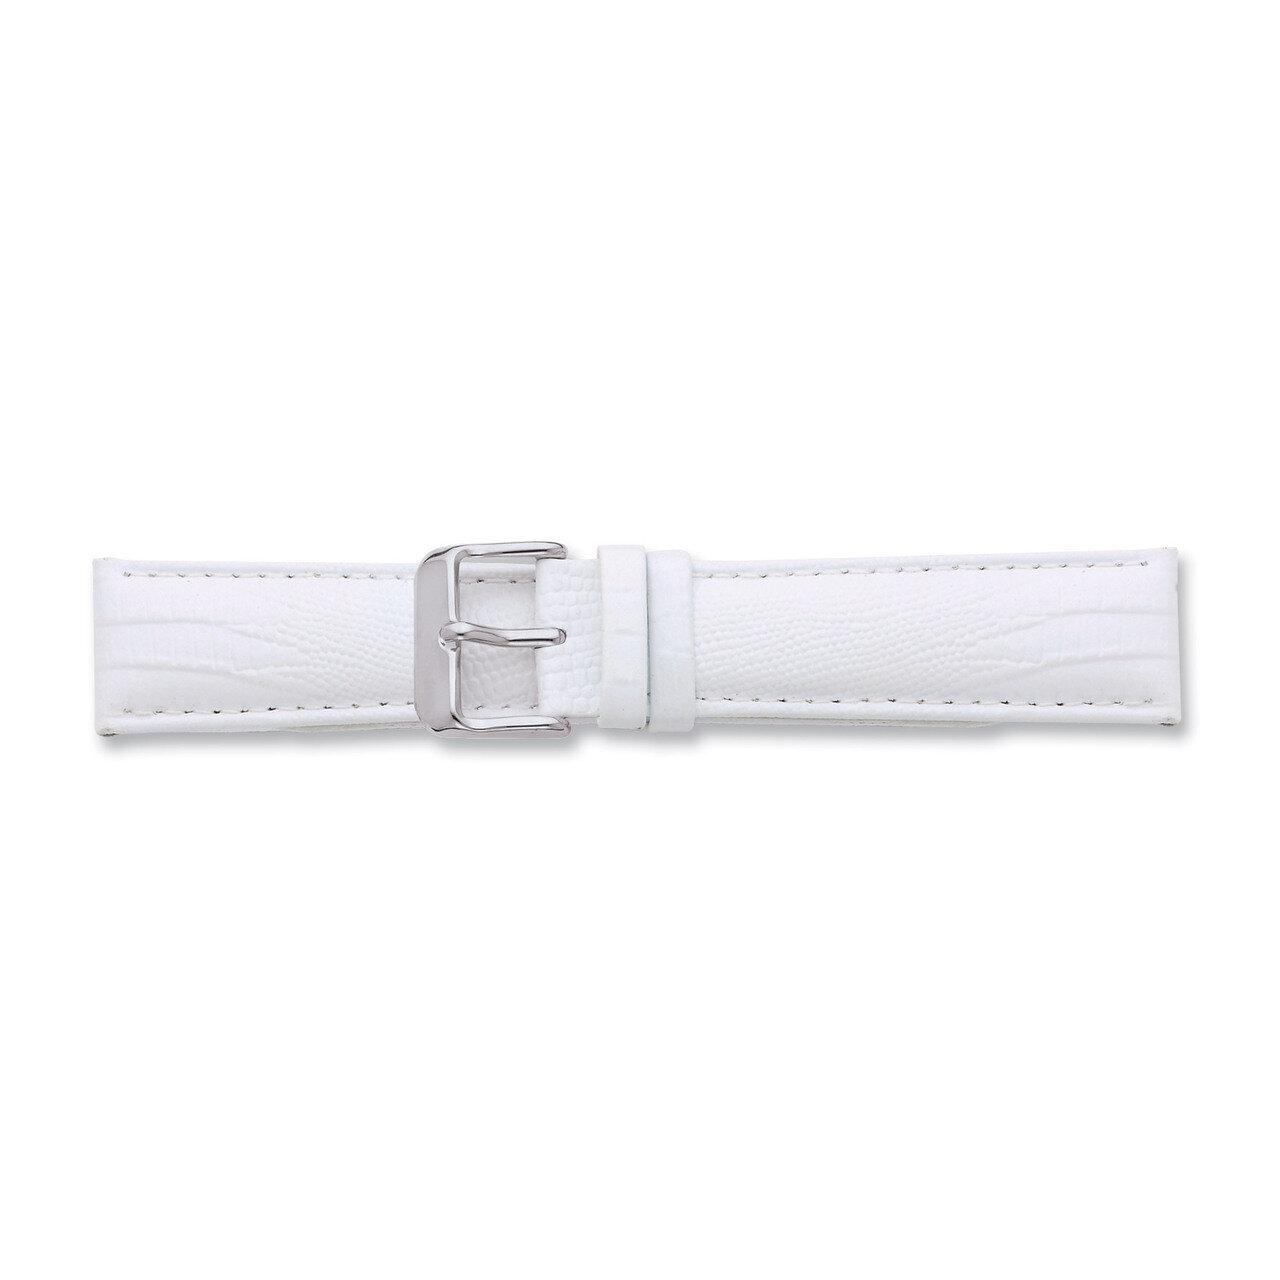 18mm White Teju Lizzard Grain Leather Watch Band 7.5 Inch Silver-tone Buckle BAW203-18